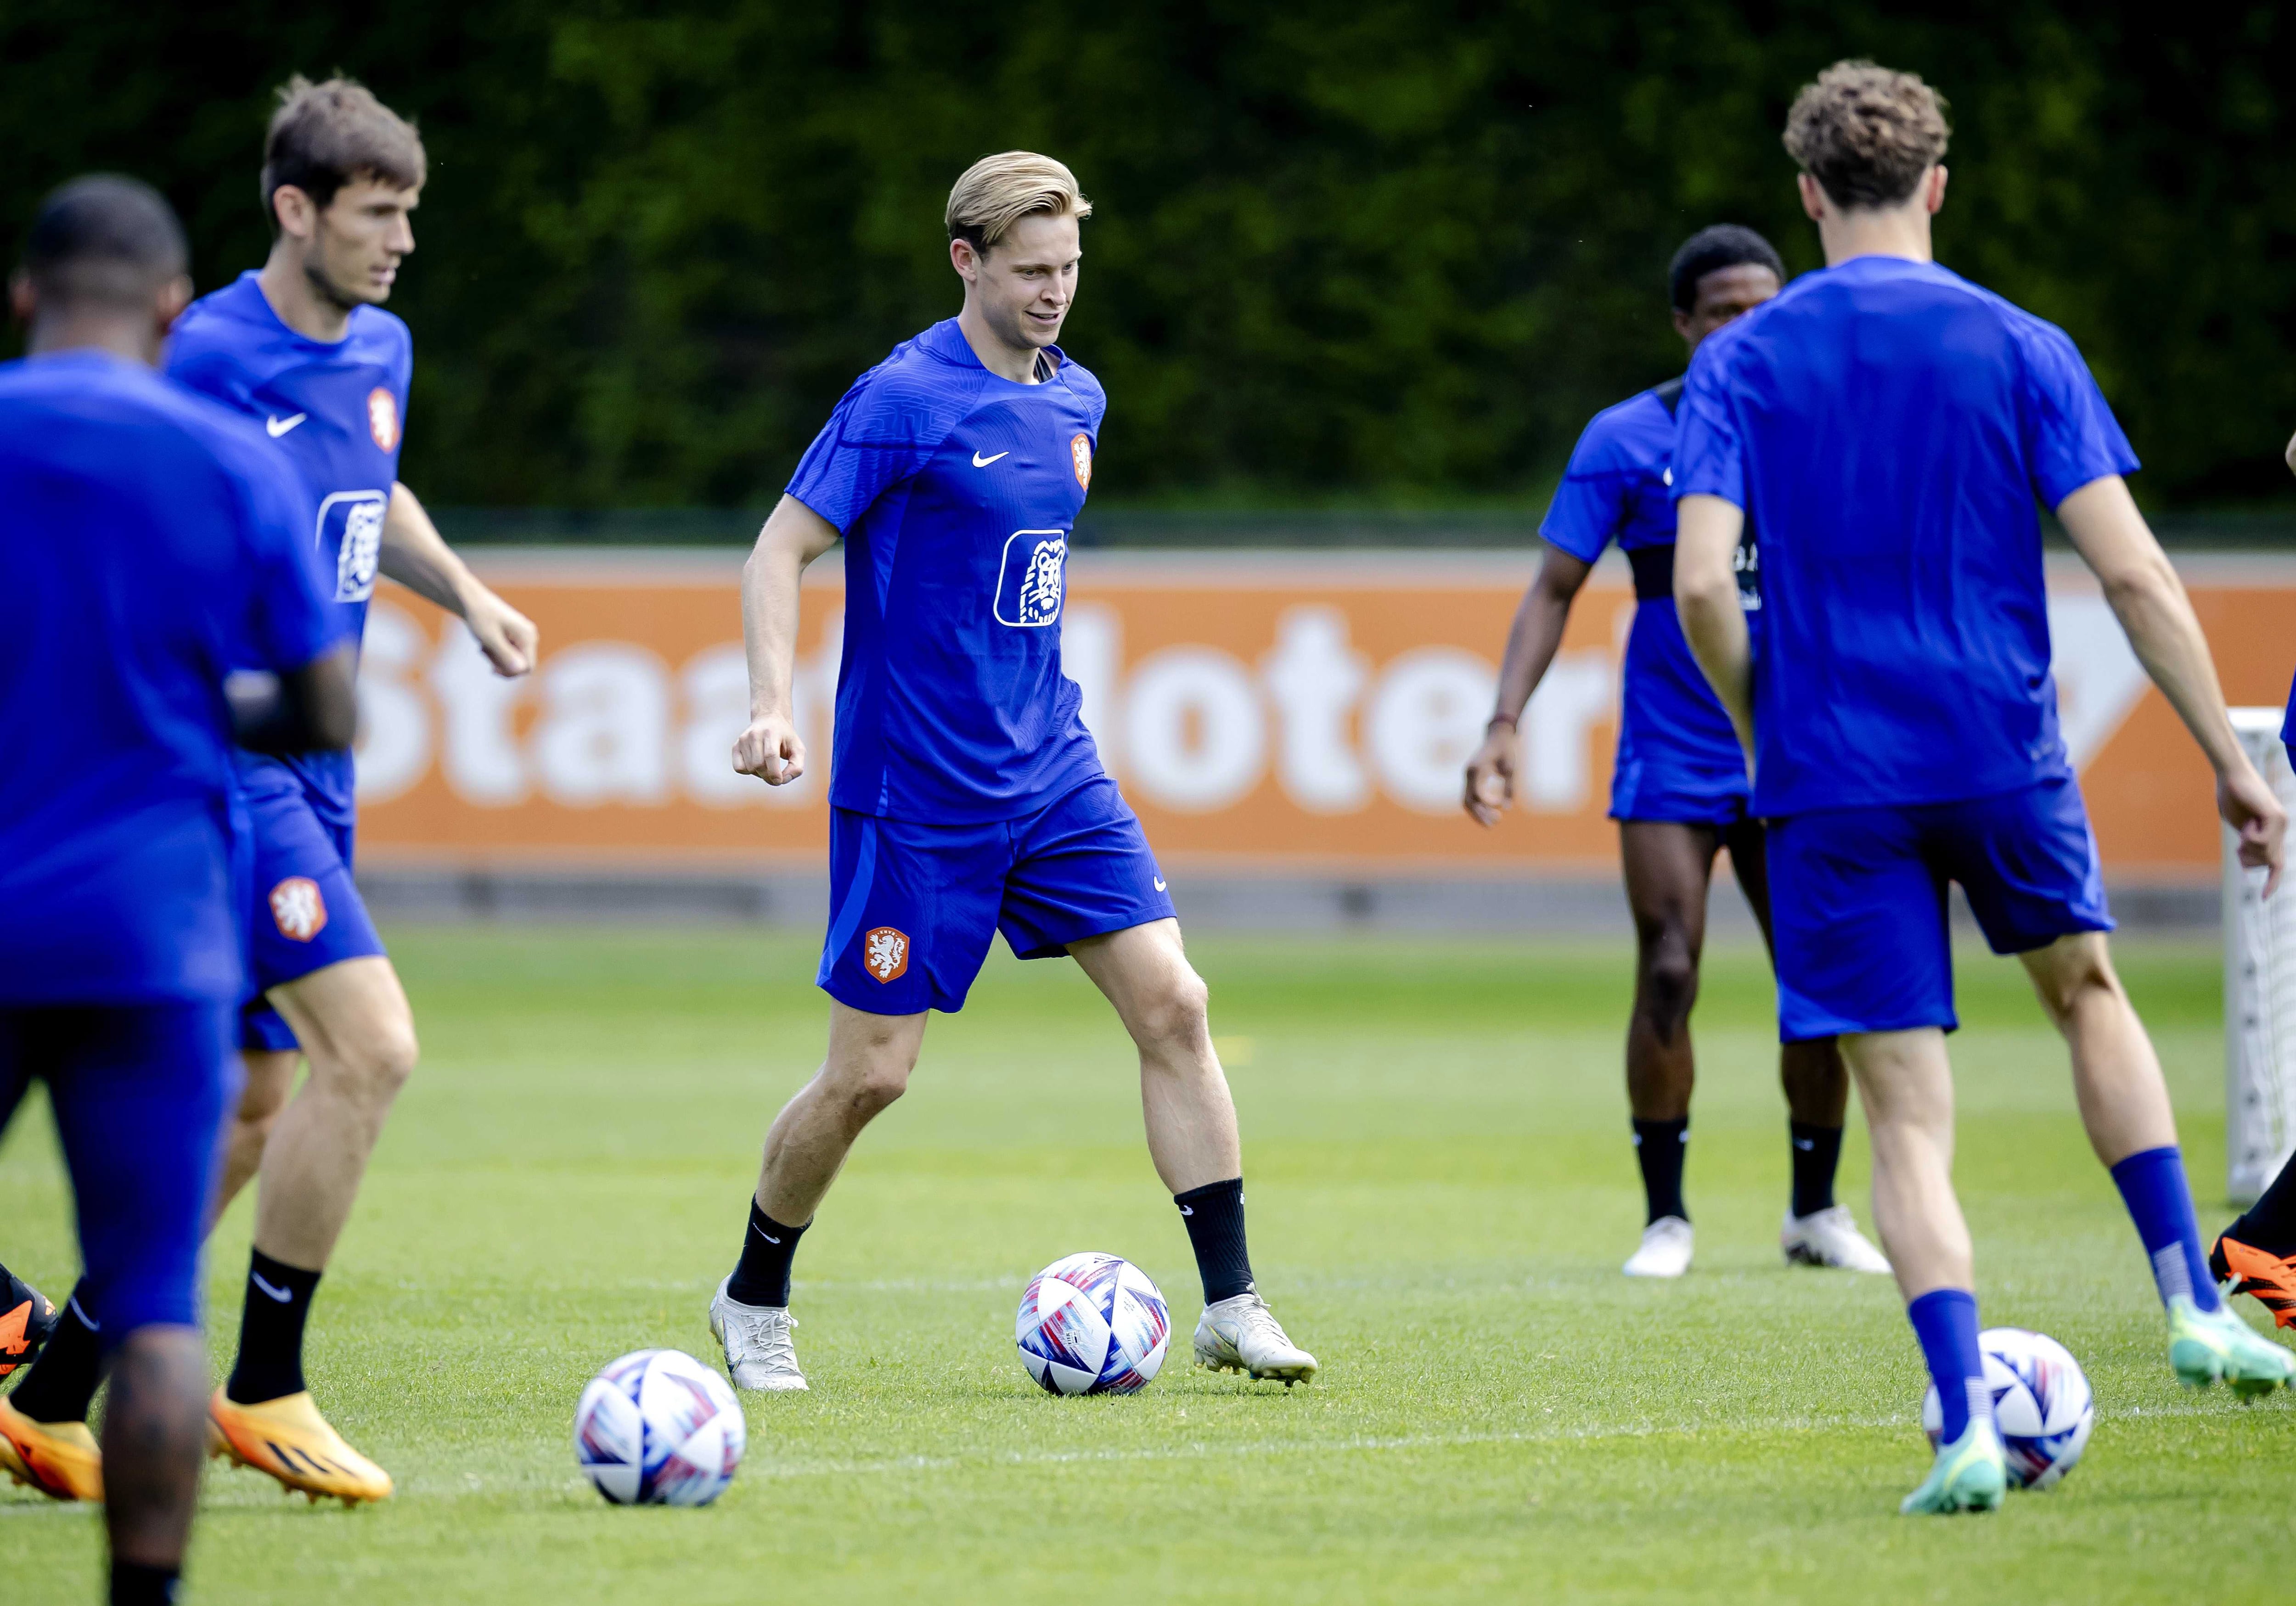 Zeist (Netherlands), 11/06/2023.- Frenkie de Jong (C) in action during a training session of the Dutch national soccer team at the KNVB Campus in Zeist, Netherlands, 11 June 2023. The Dutch national team is preparing for the the UEFA Nations League semi-final match against Croatia to be played on 14 June. (Croacia, Países Bajos; Holanda) EFE/EPA/Robin van Lonkhuijsen
